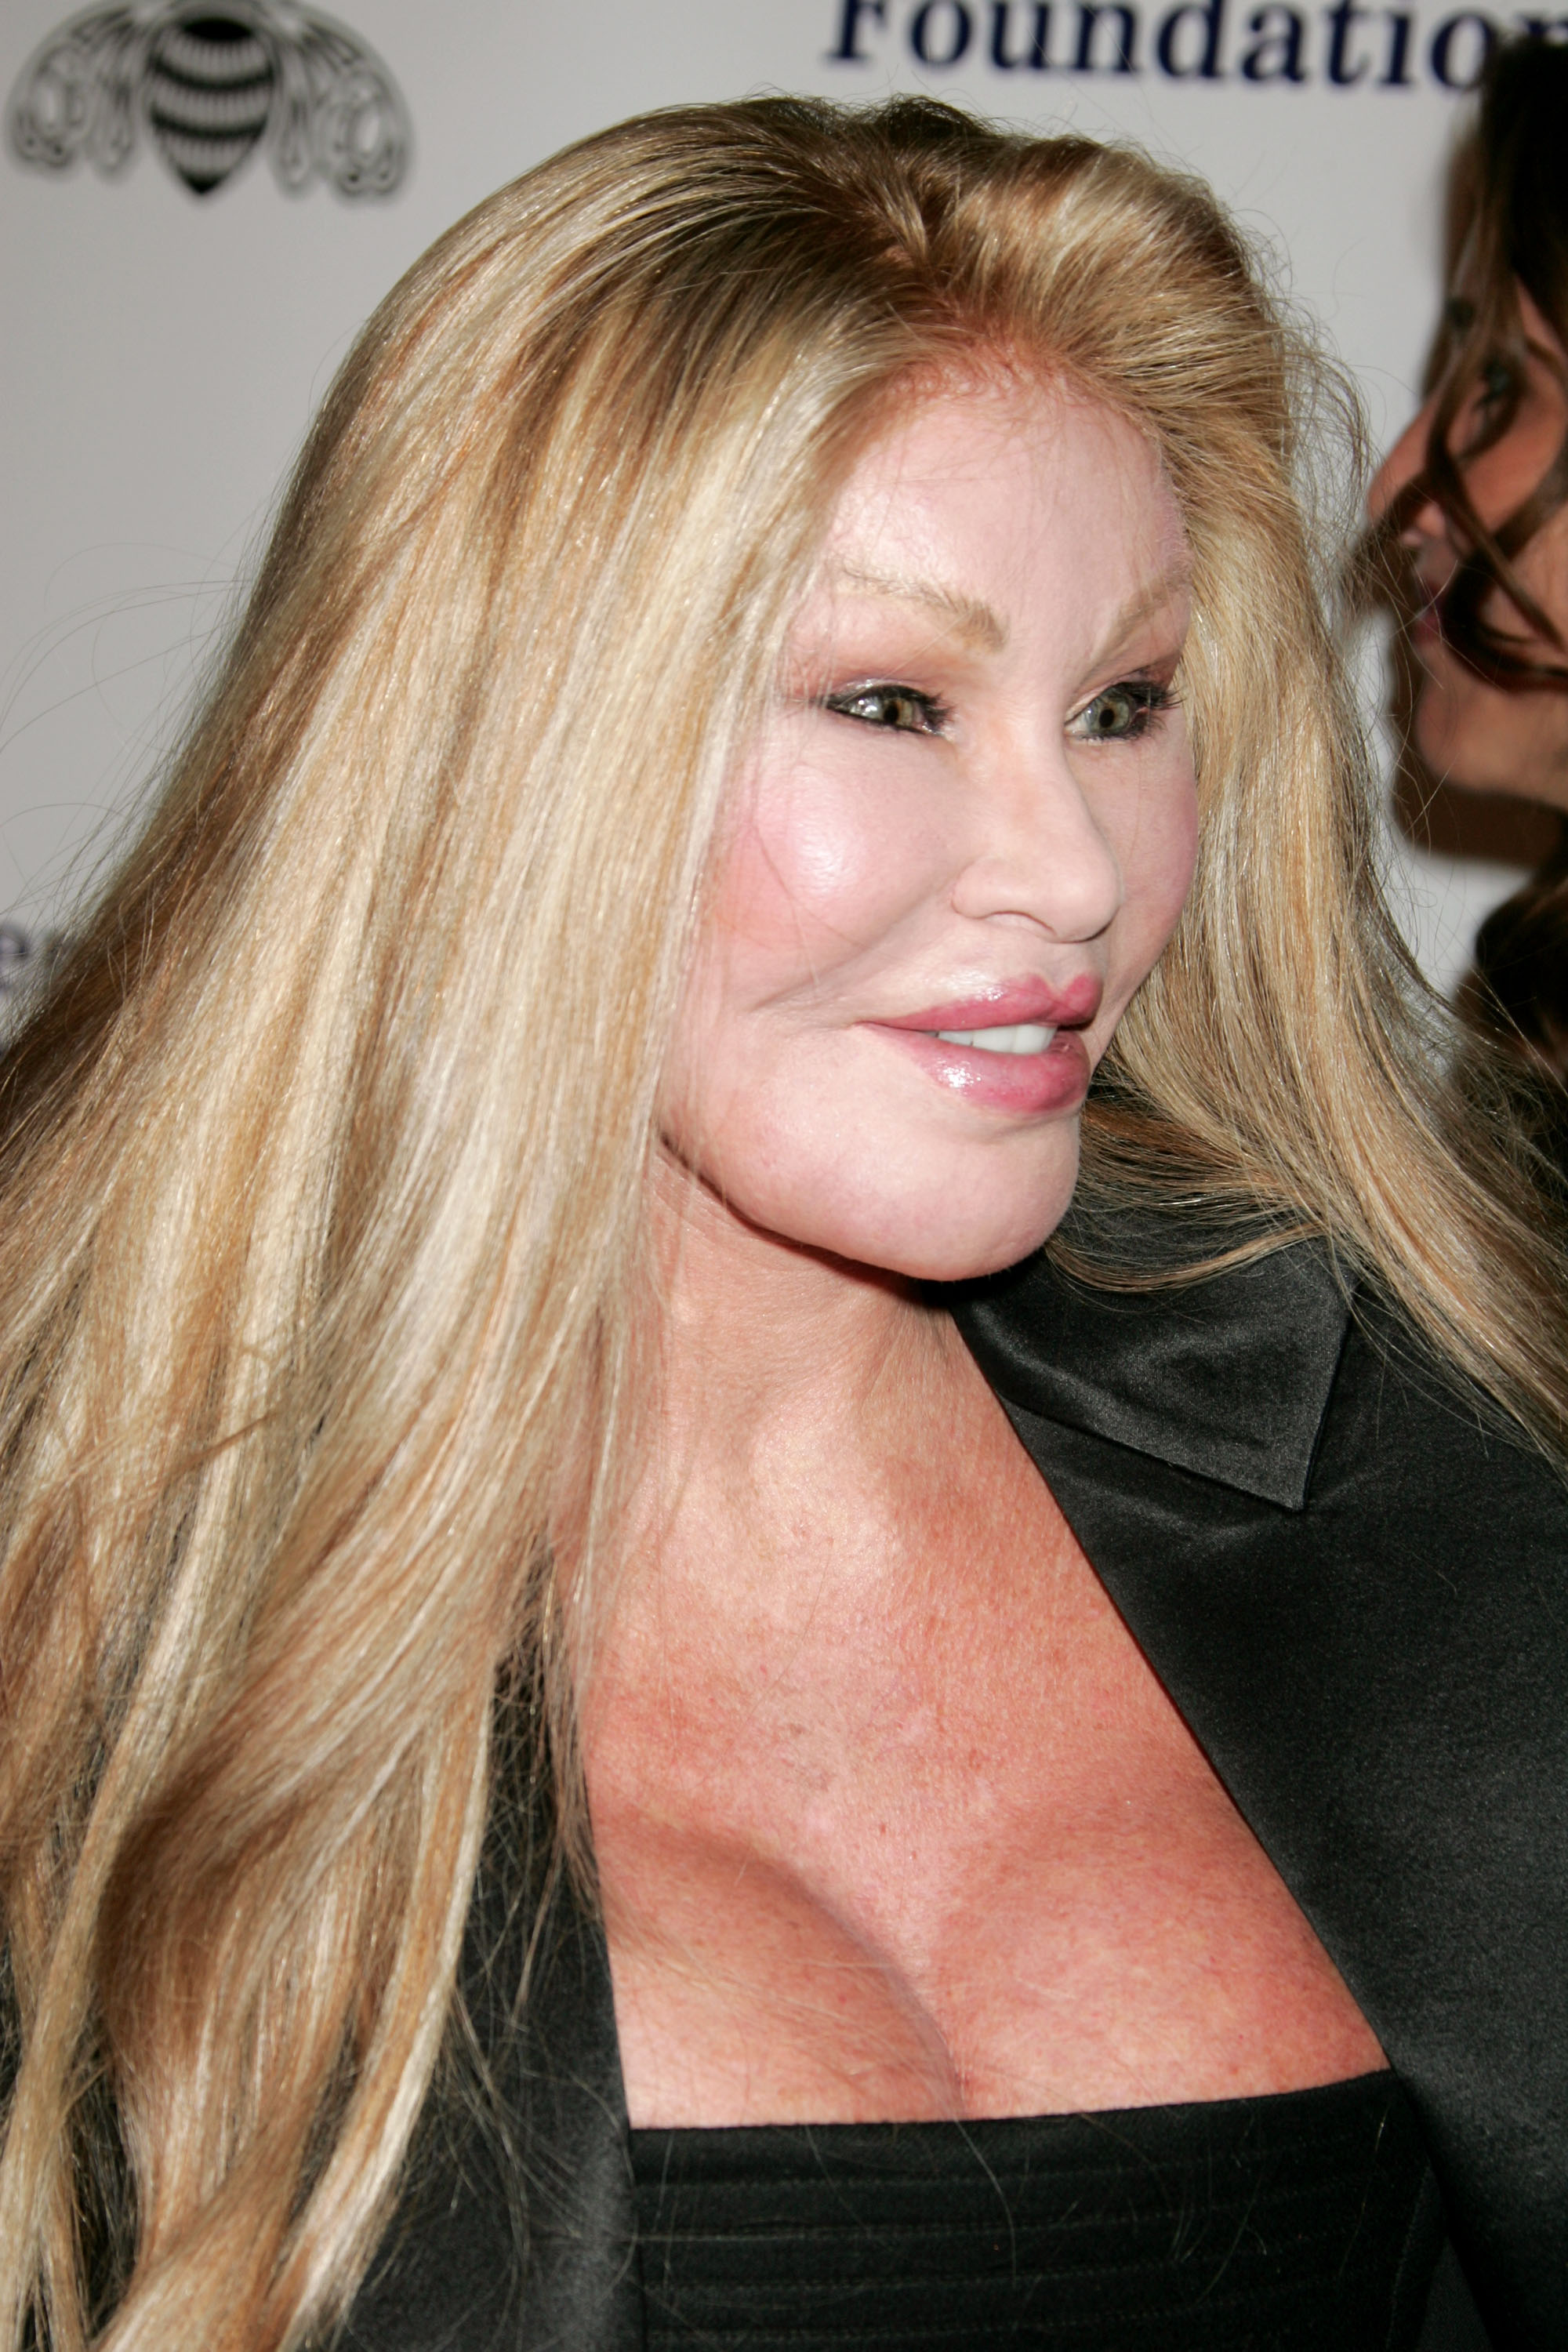 Jocelyne Wildenstein arrives at Children Uniting Nations' 9th annual awards celebration and viewing dinner held at the Beverly Hilton hotel in Beverly Hills, California, on February 24, 2008. | Source: Getty Images